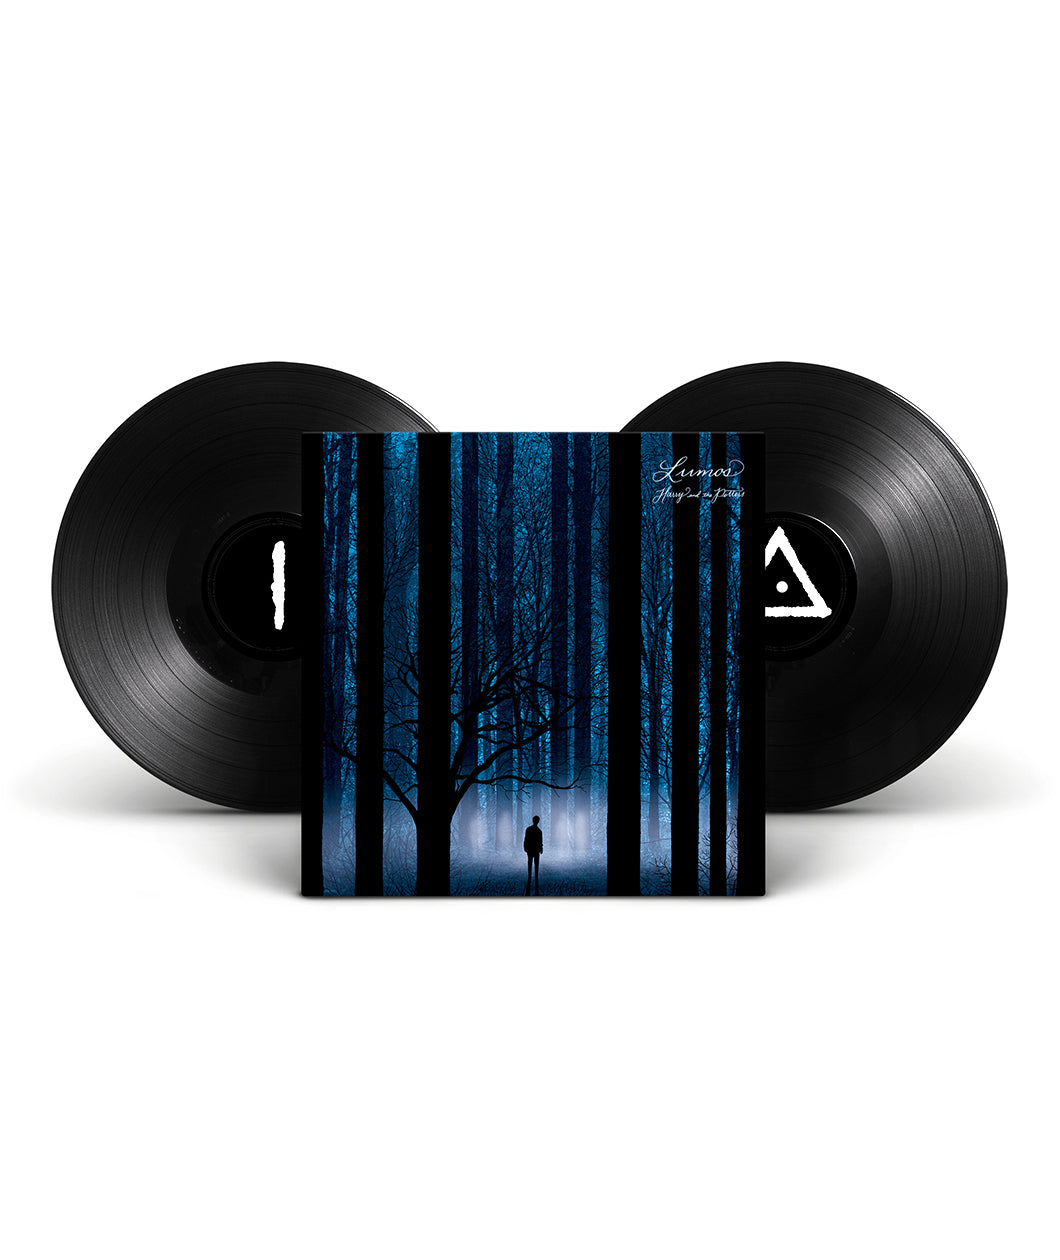 Two black vinyl records flank the record's cardboard sleeve. The sleeve depicts an ominous forest scene with blue light and black trees, and a lone figure stands amongst them. The text "Lumos" "Harry and the Potters" is in the top right corner of the sleeve in a white script.